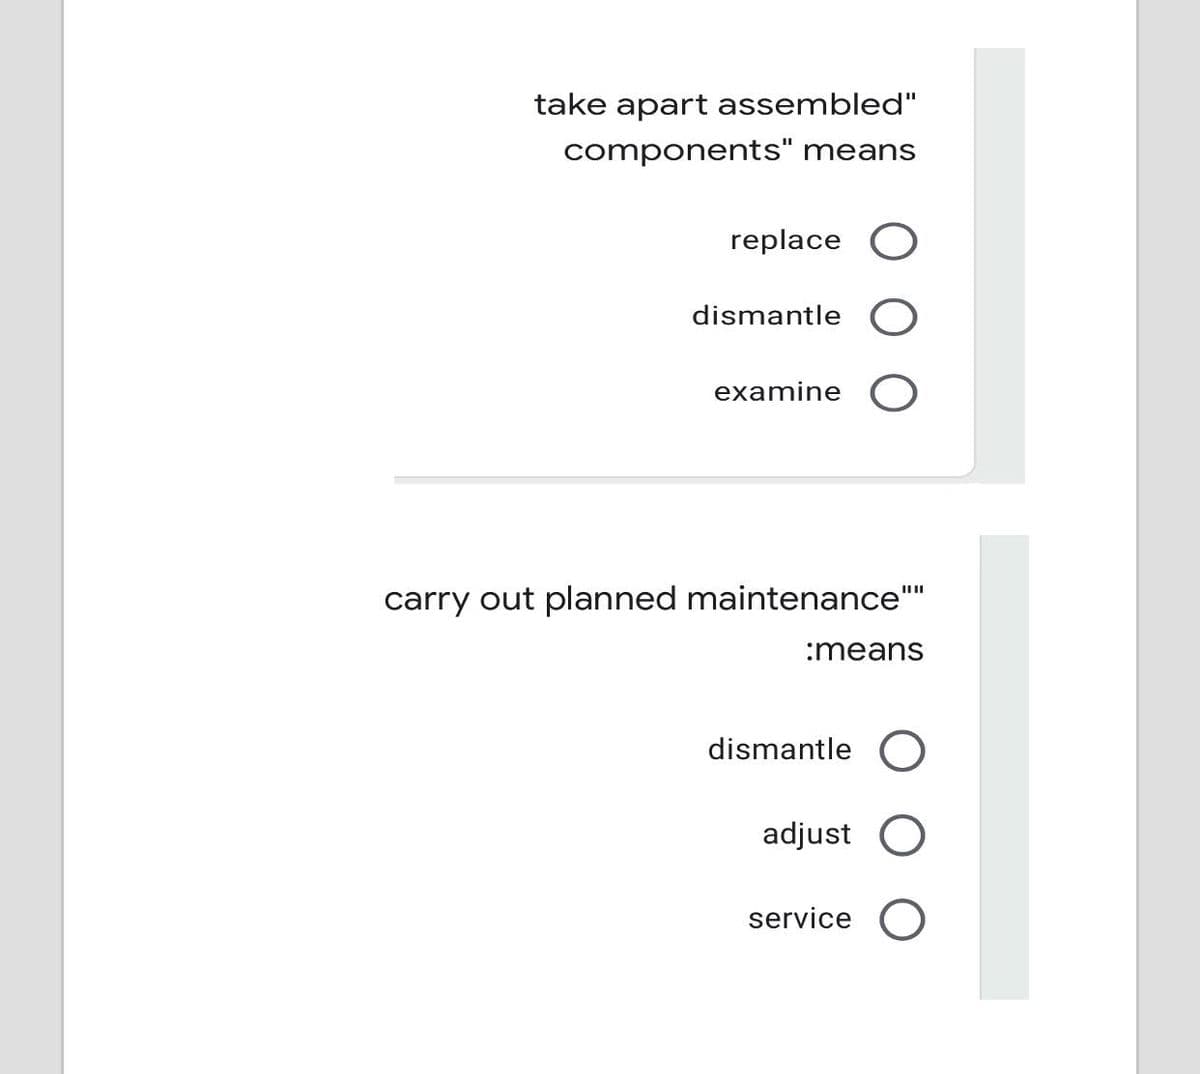 take apart assembled"
components" means
replace
dismantle
examine
carry out planned maintenance"
:means
dismantle O
adjust O
service O